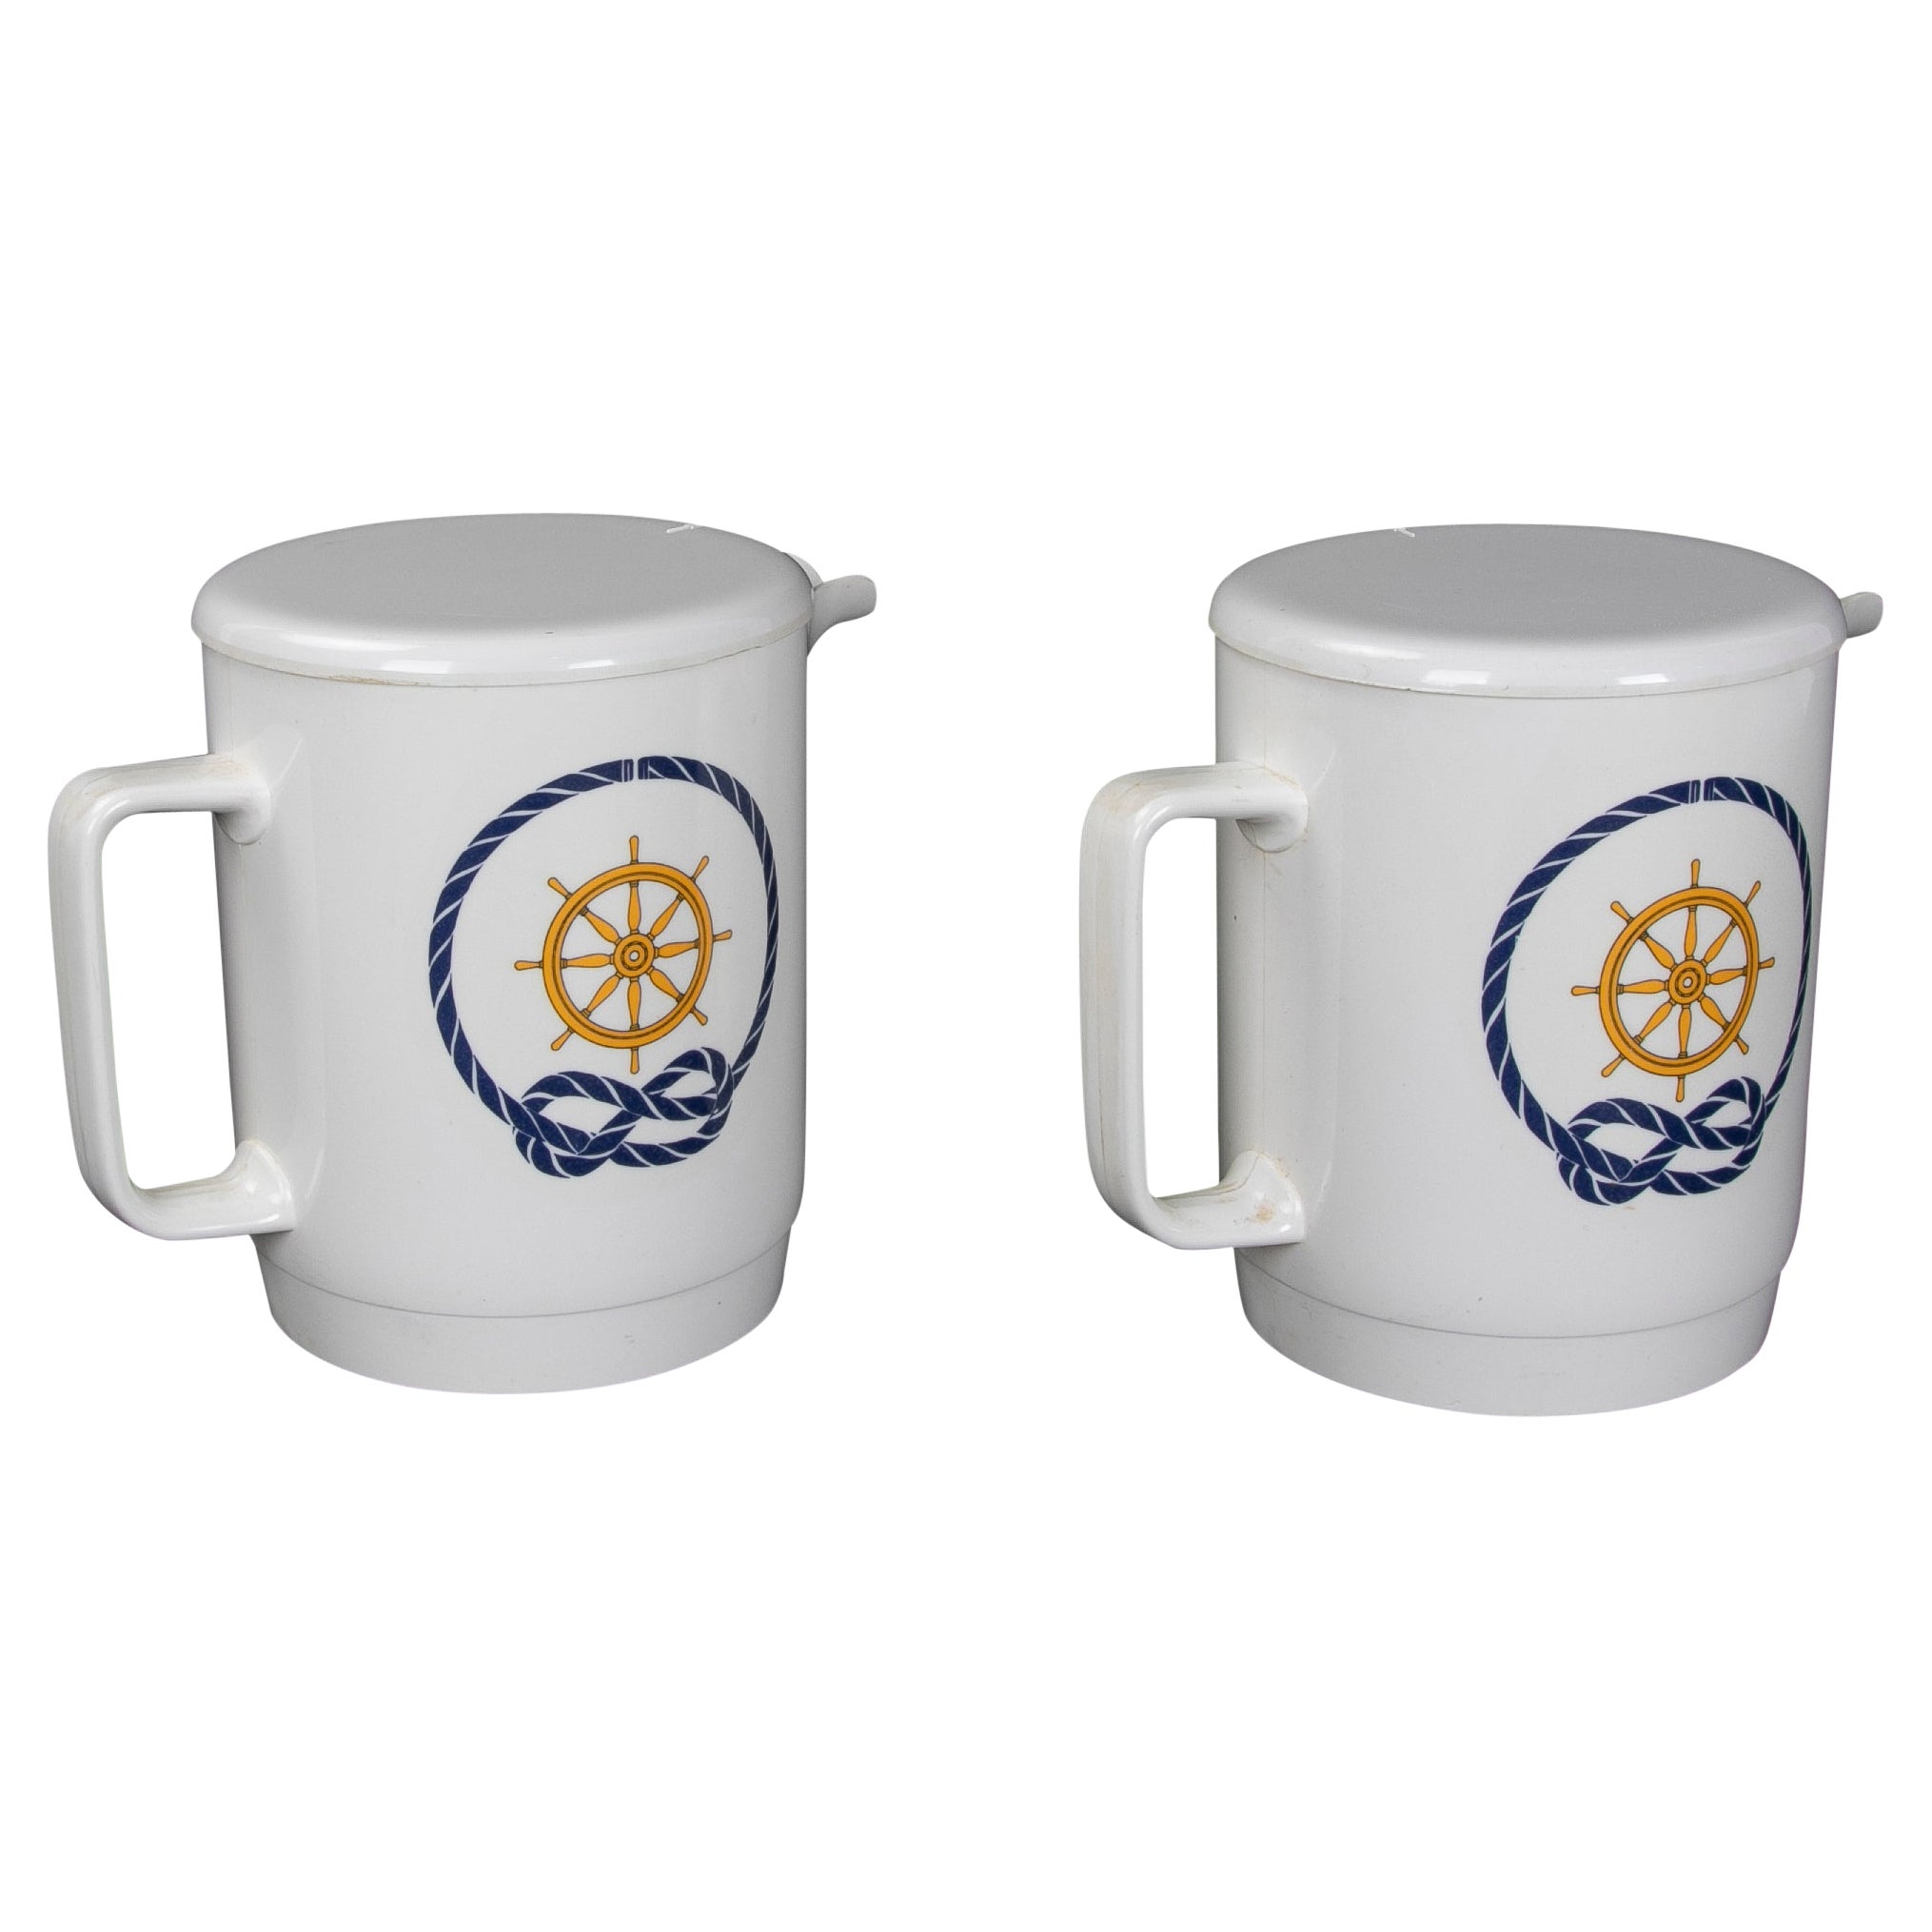 1980s Pair of Boat Mugs with Sailor Decoration Design by a. Opel